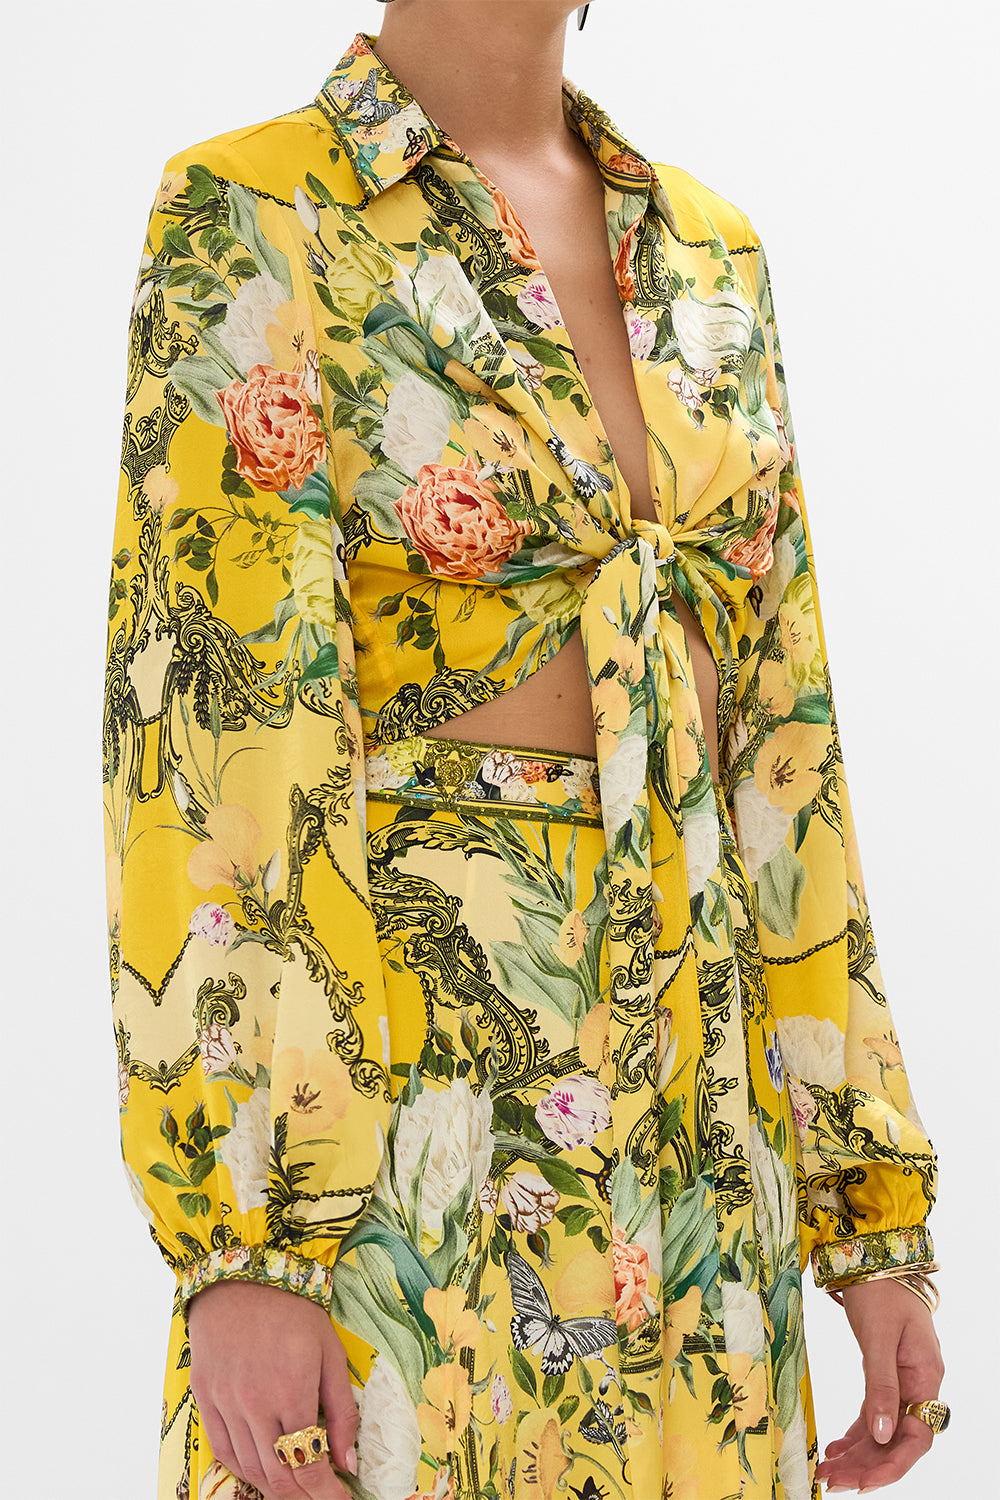 CAMILLA gold cropped wrap shirt in Paths Of Gold print.